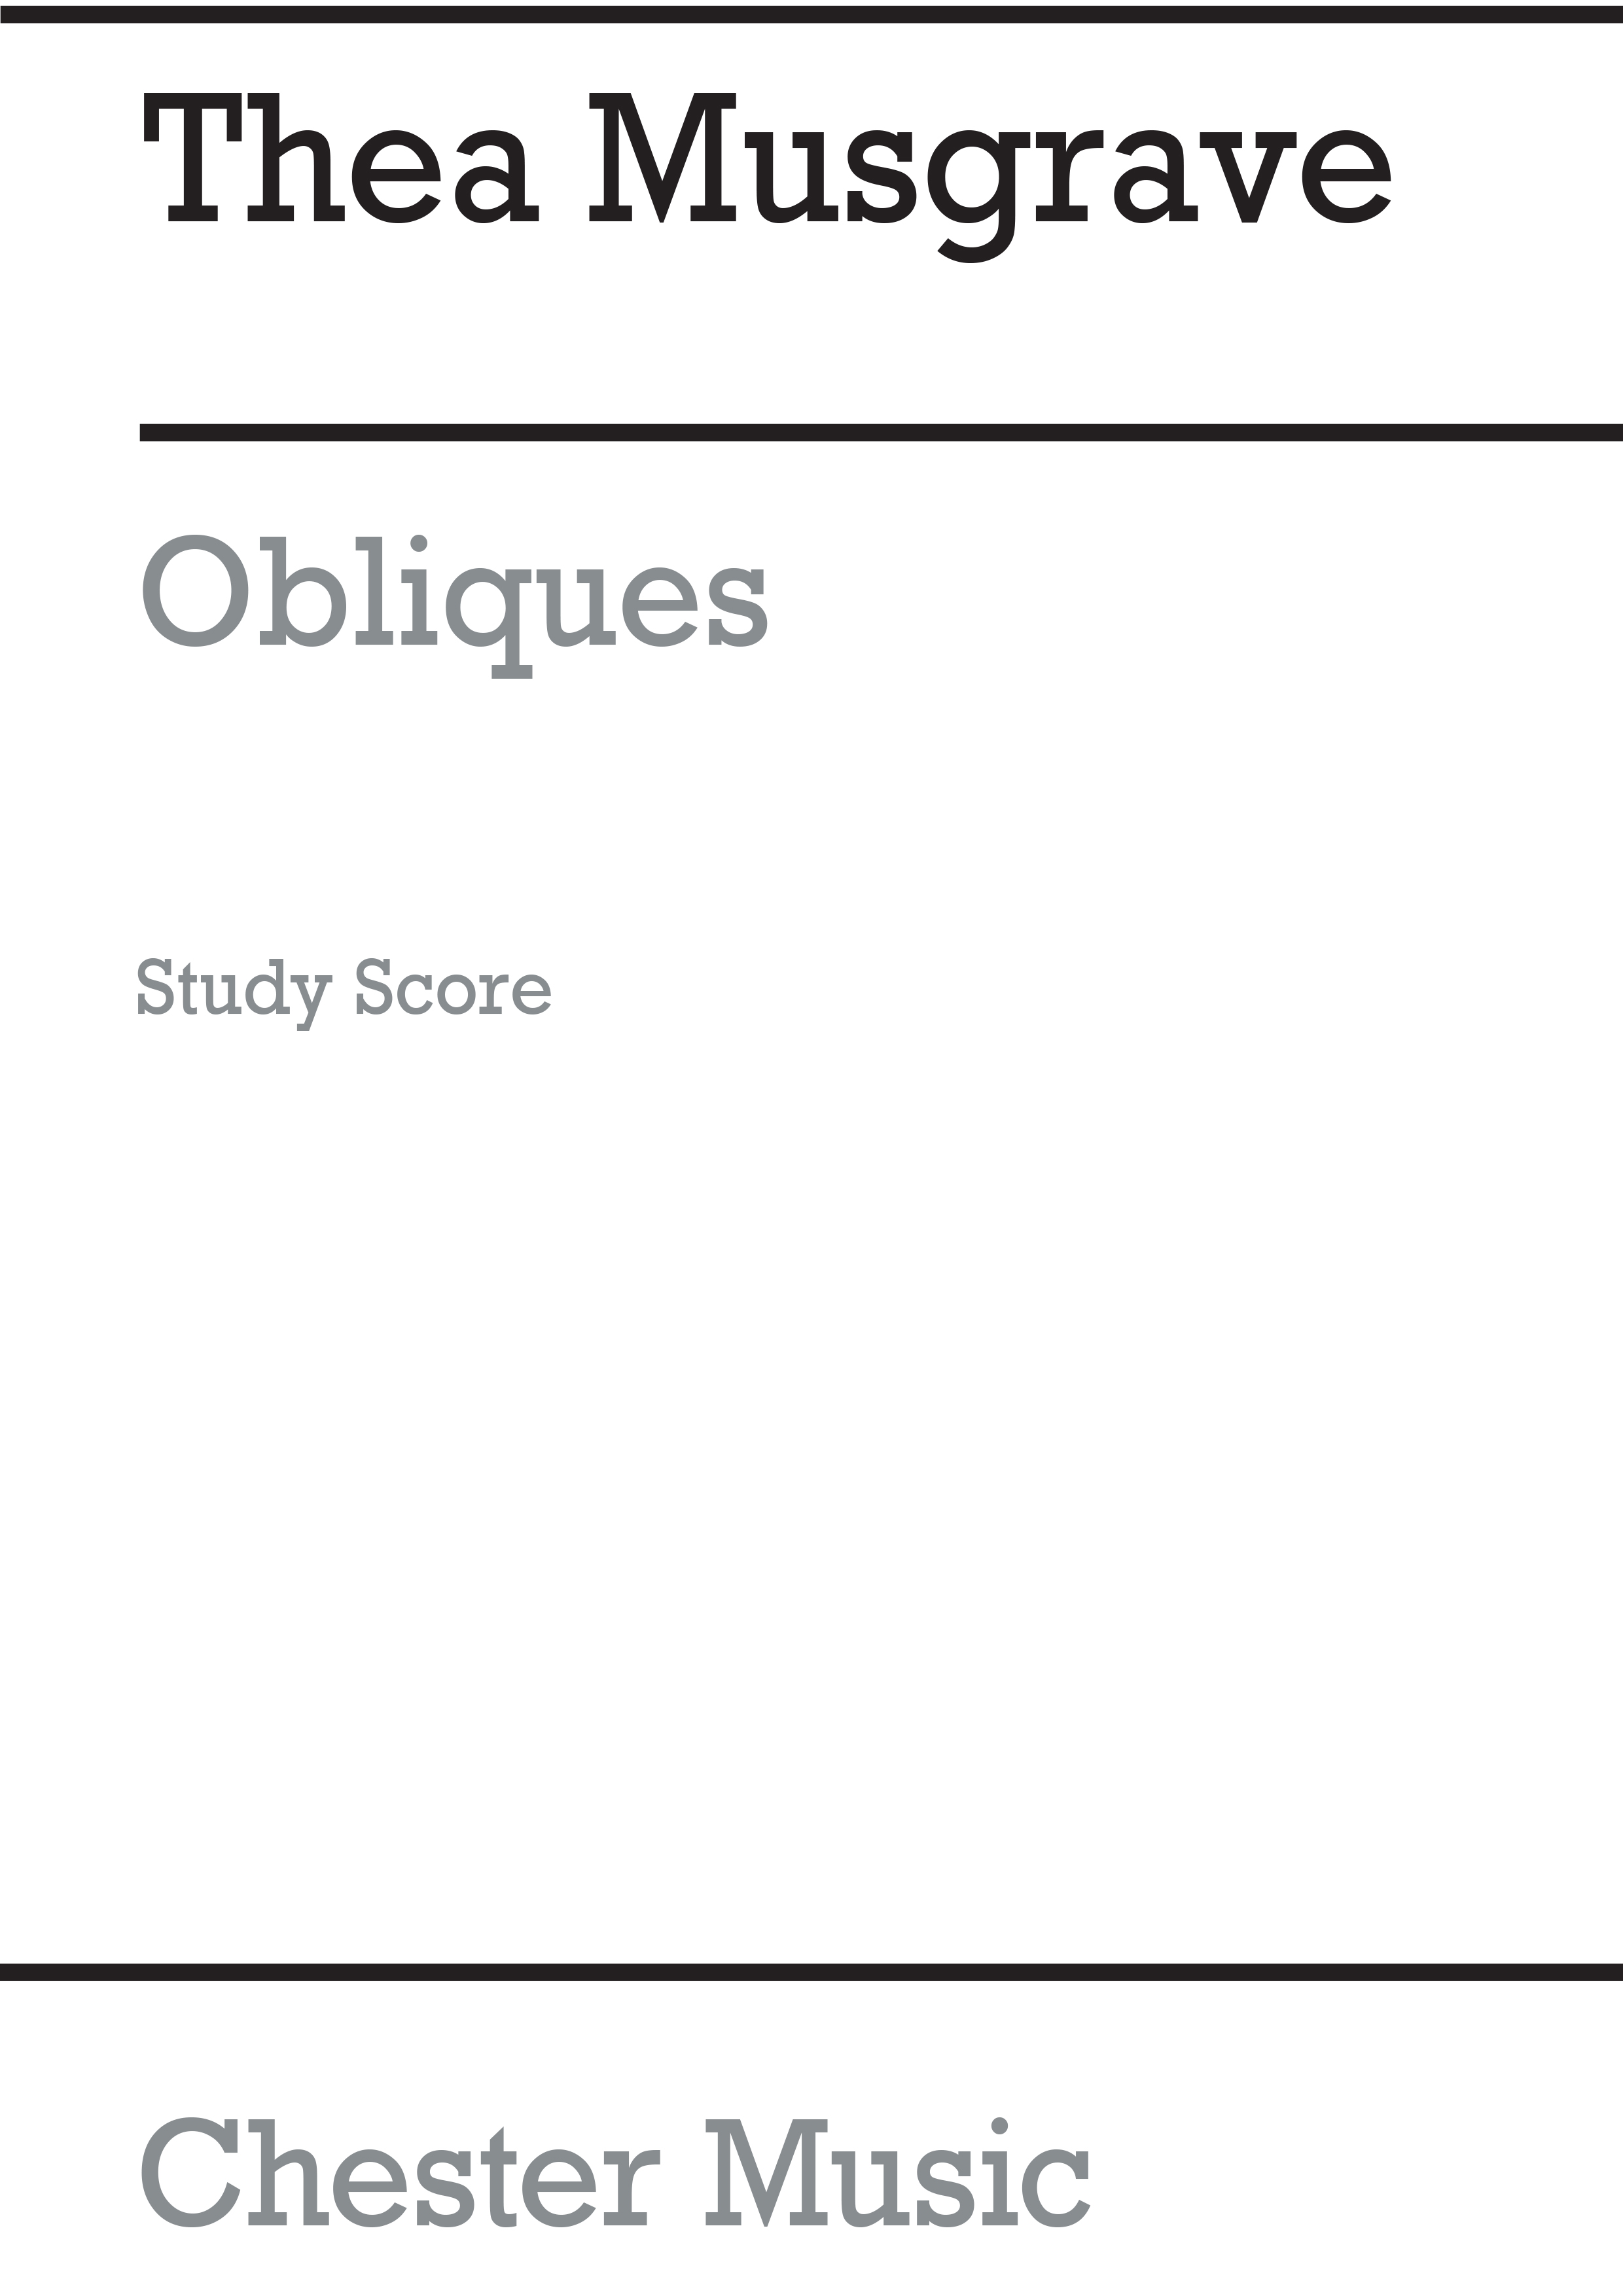 Thea Musgrave: Obliques Orch: Orchestra: Study Score